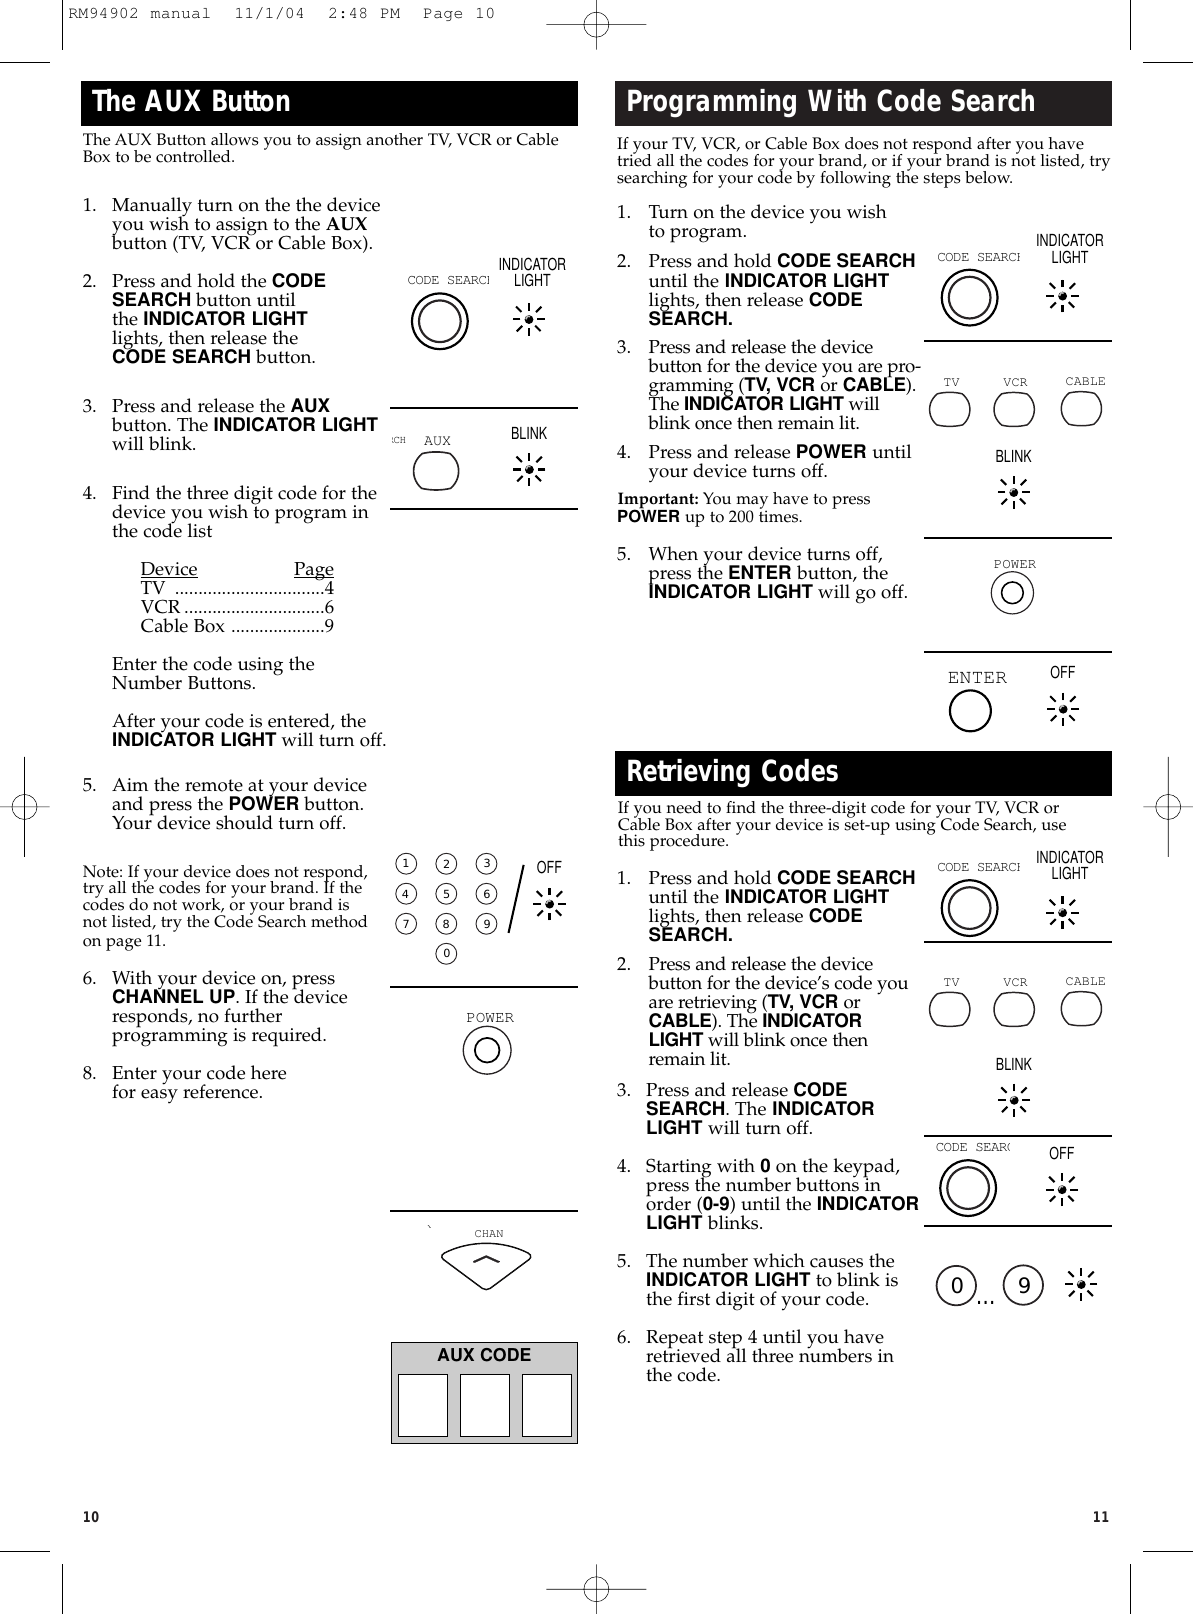 Page 5 of 8 - Ge-Appliances Ge-94902-Ge-Universal-Remote-Owners-Manual RM94902 Manual